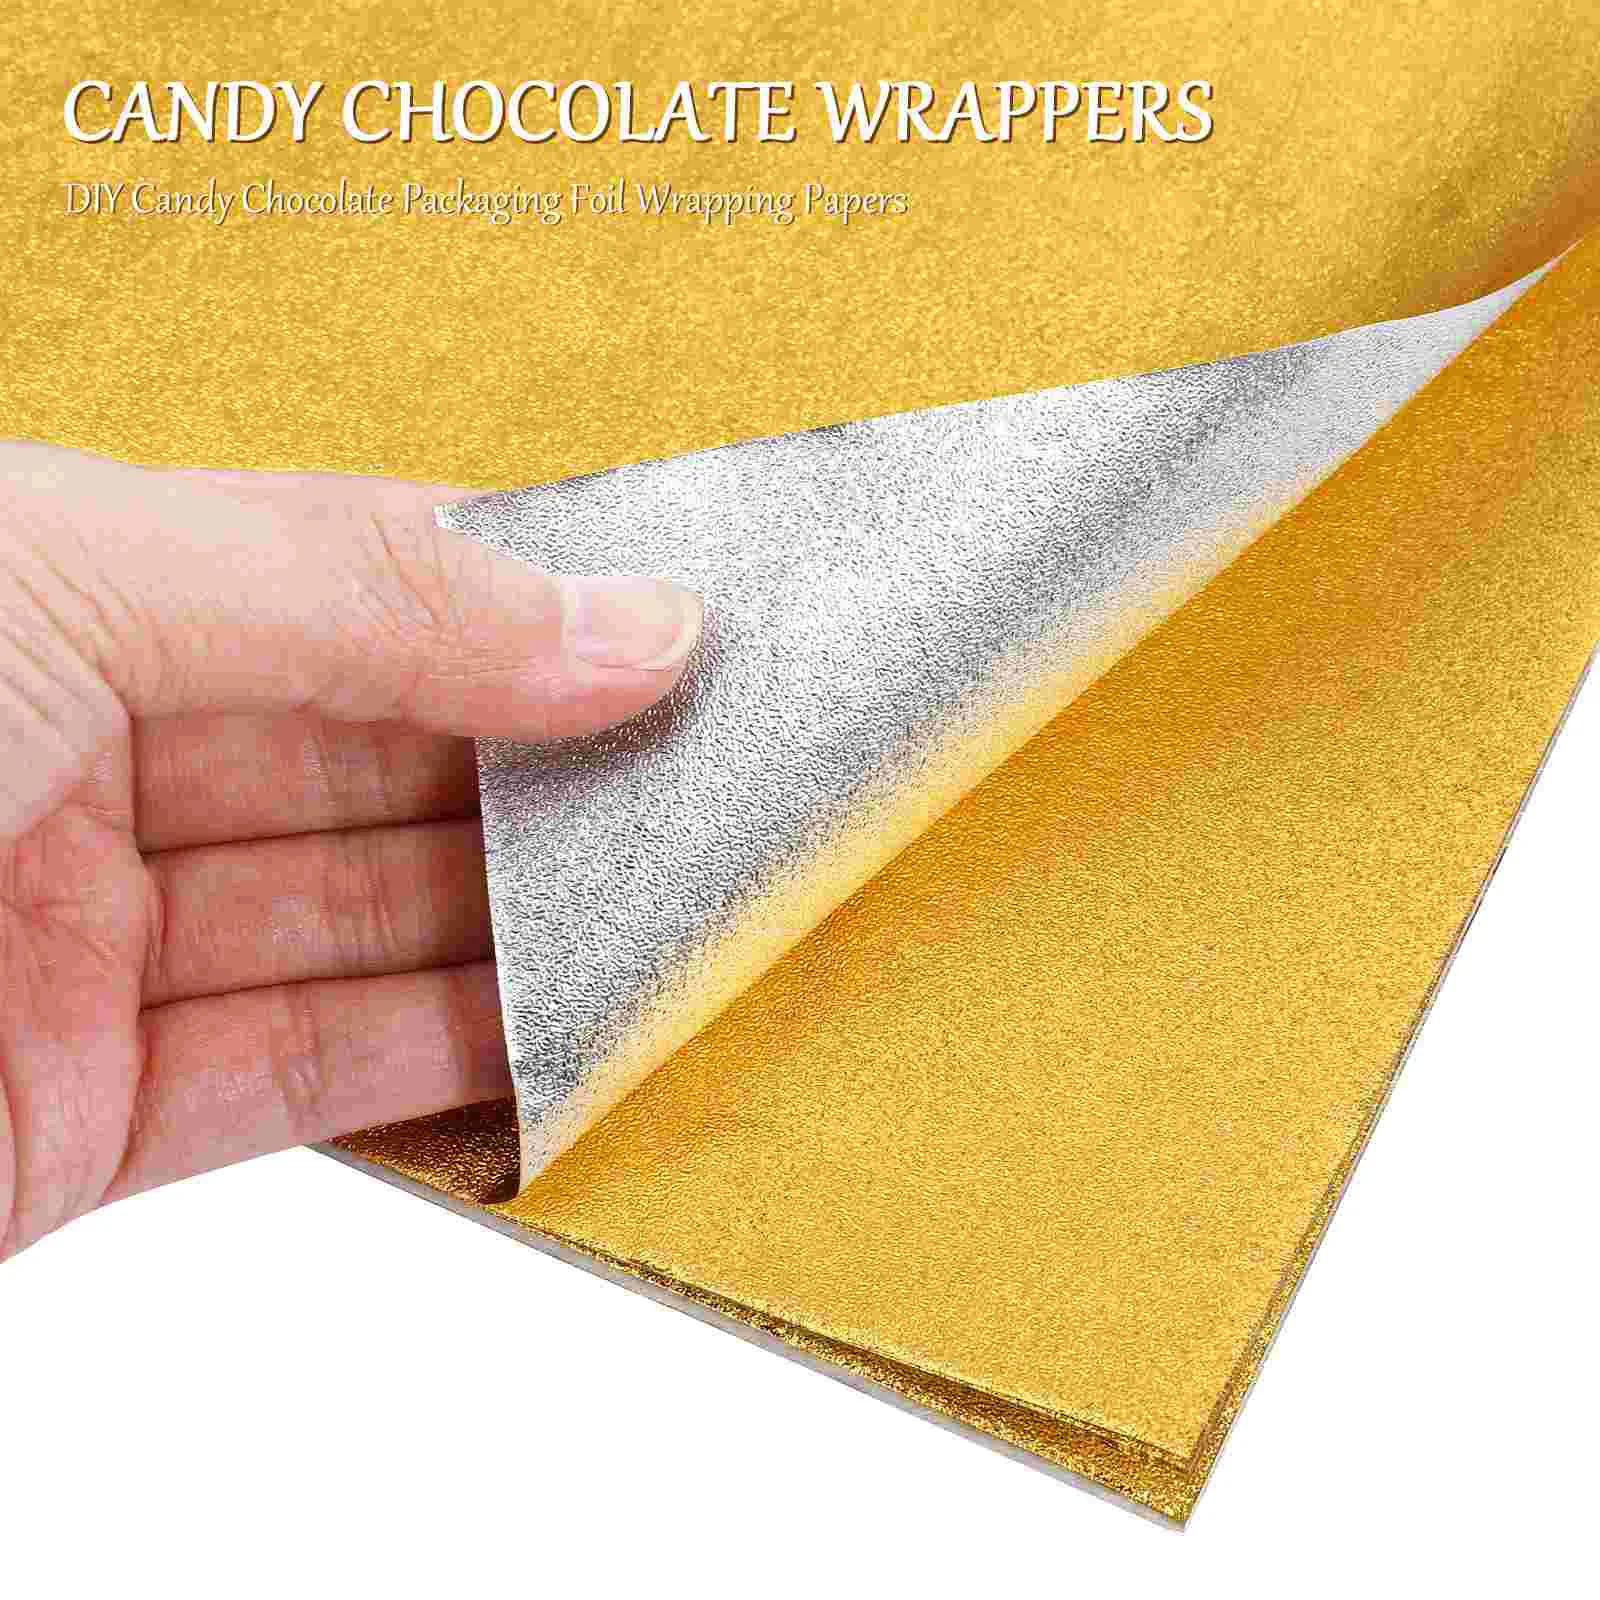 300 Pcs Square Golden Aluminium Foil Candy Wrappers Square Sweets Lolly  Paper for DIY Candies and Chocolate Packaging by Party Wedding Birthday